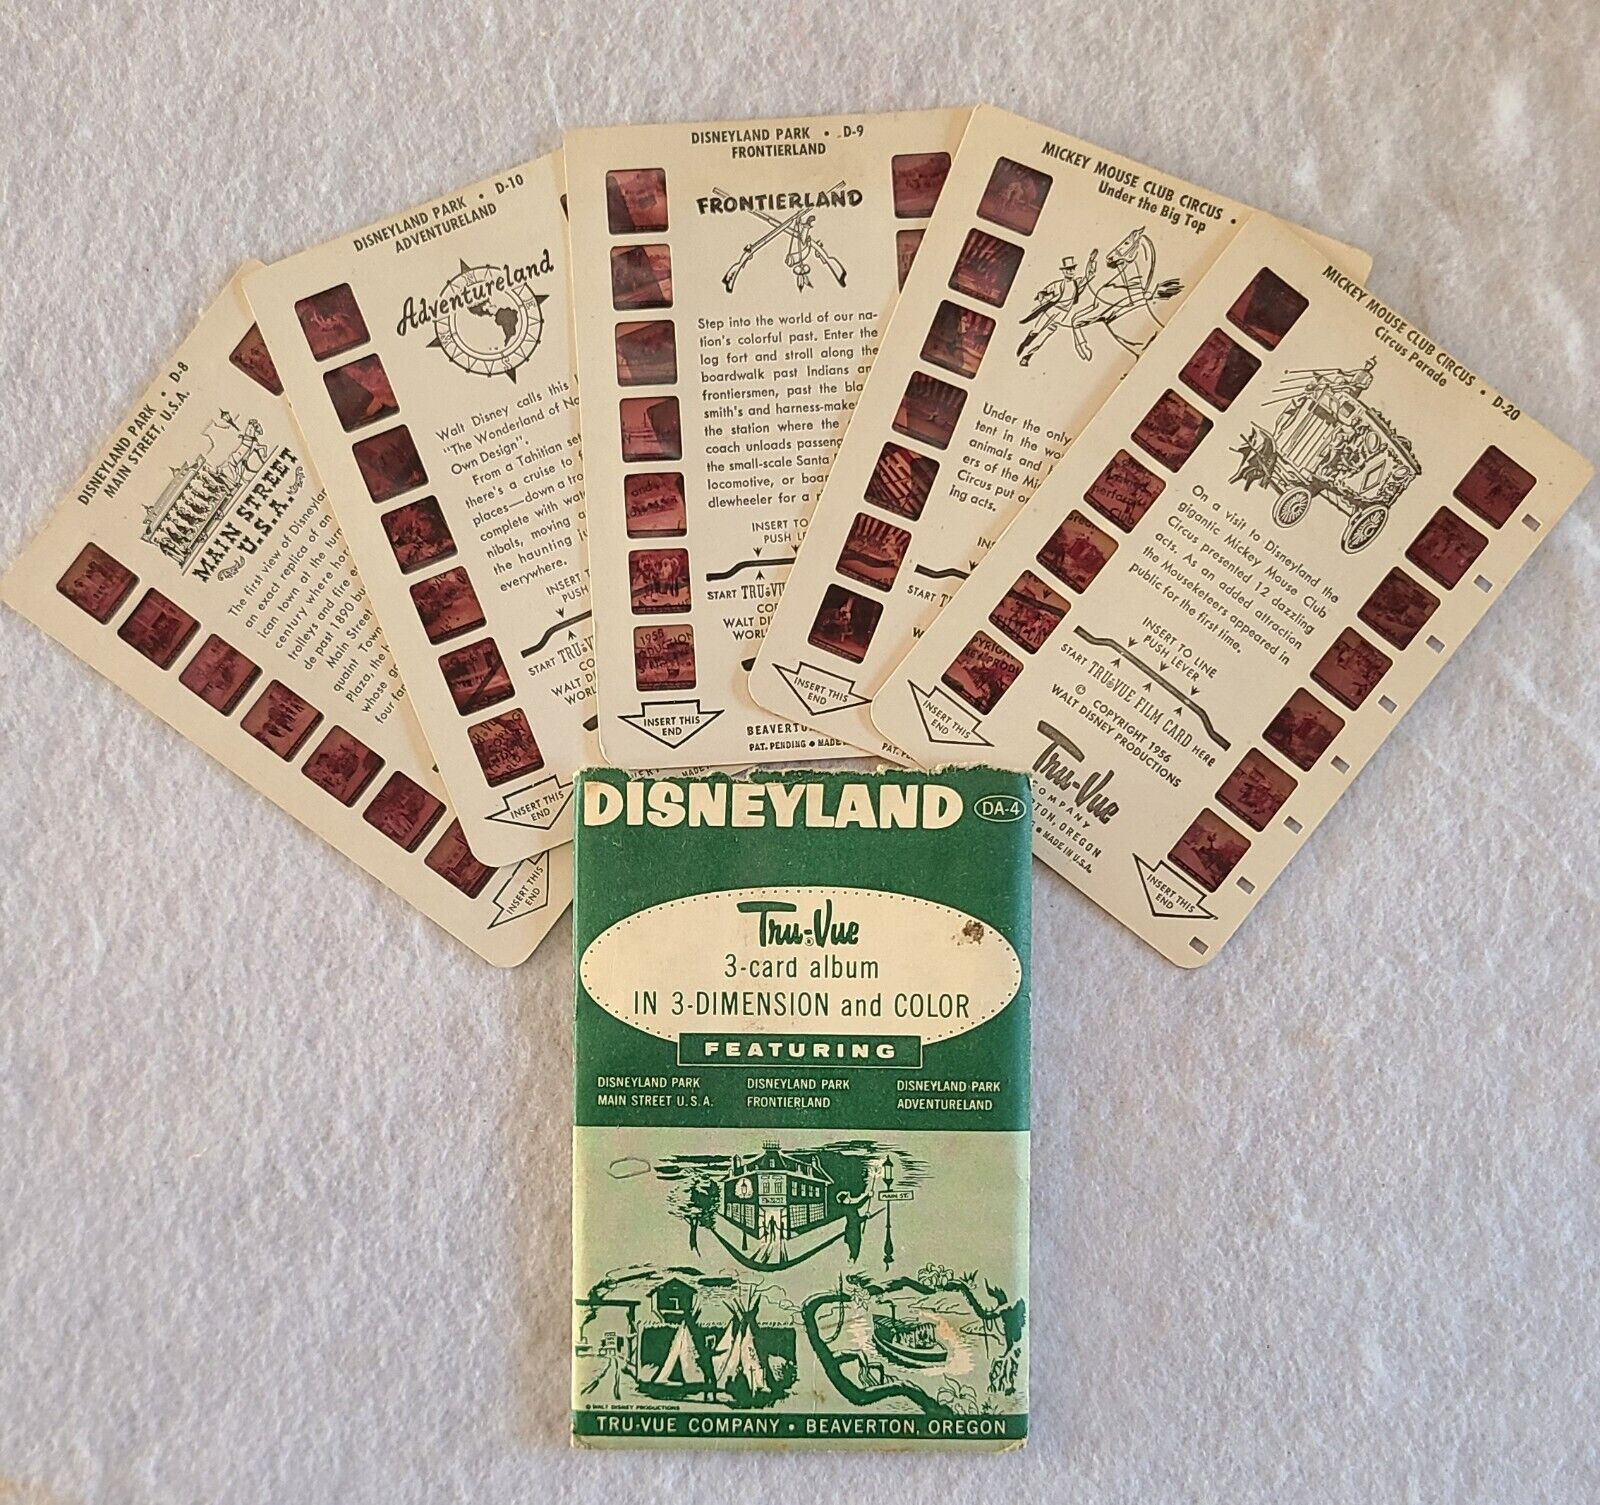 Vintage 1960s Disneyland Tru-Vue 3-Card Album w/5 cards - Mickey Mouse and more